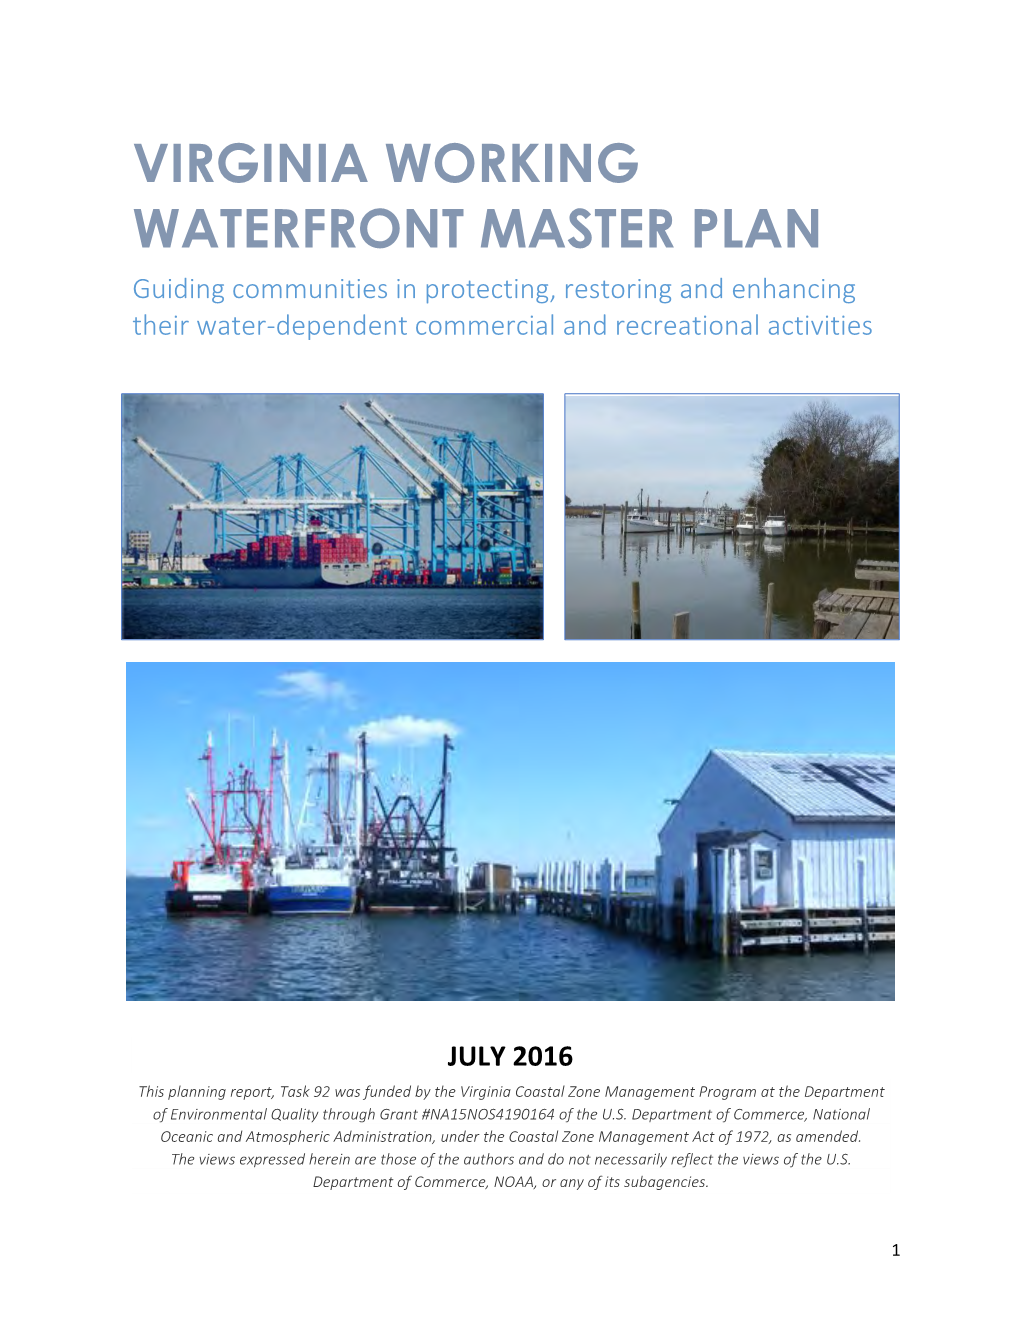 VIRGINIA WORKING WATERFRONT MASTER PLAN Guiding Communities in Protecting, Restoring and Enhancing Their Water-Dependent Commercial and Recreational Activities